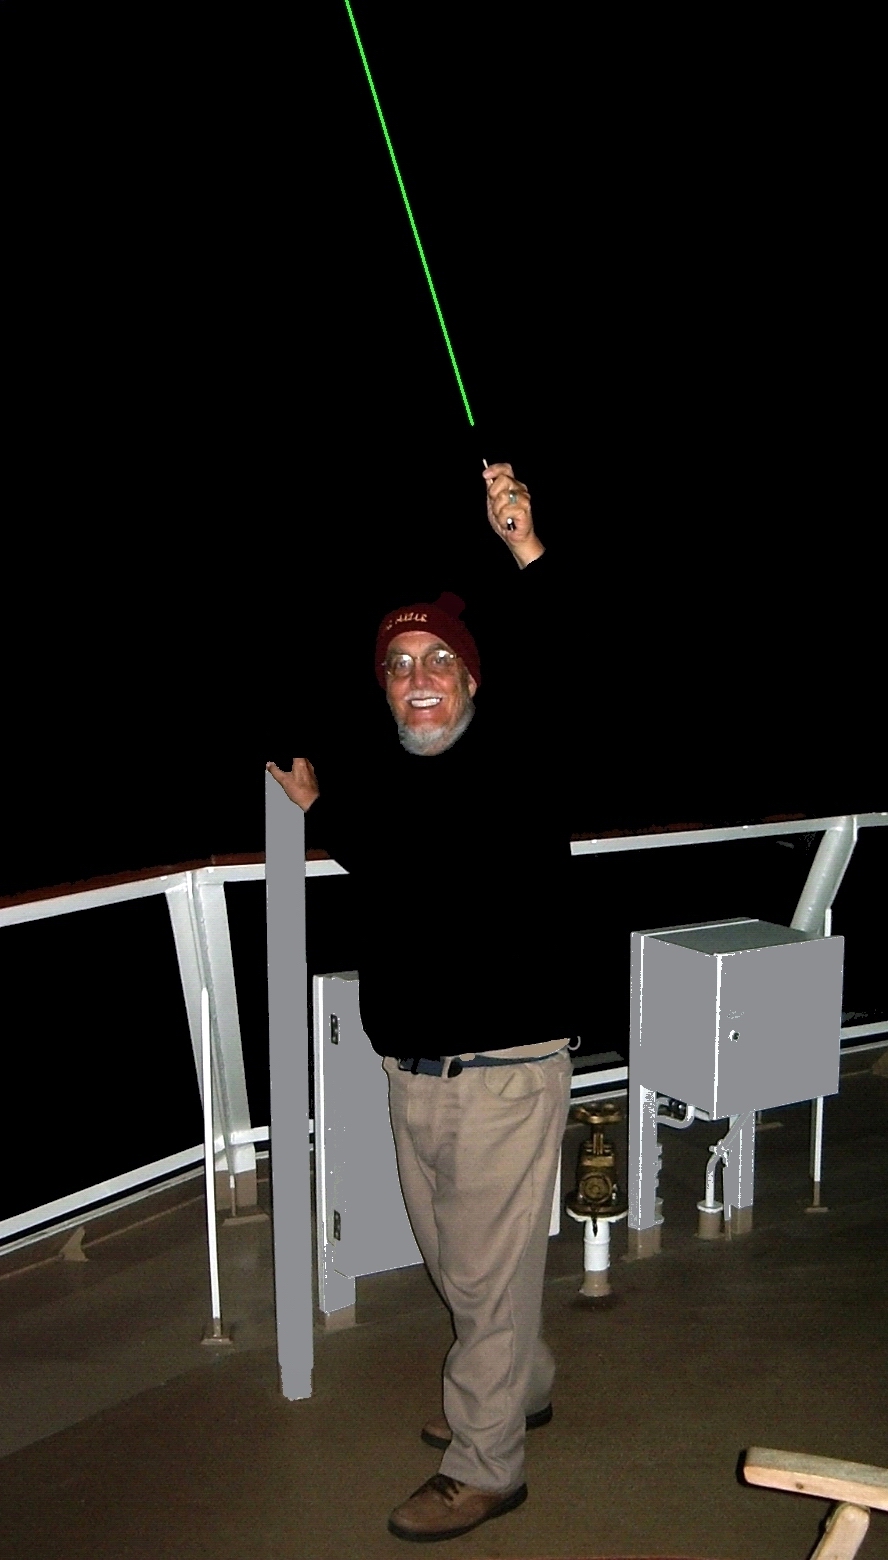 The Olde Stargeezer at sea leading stargazing. GREEN laser beam is 6 miles high